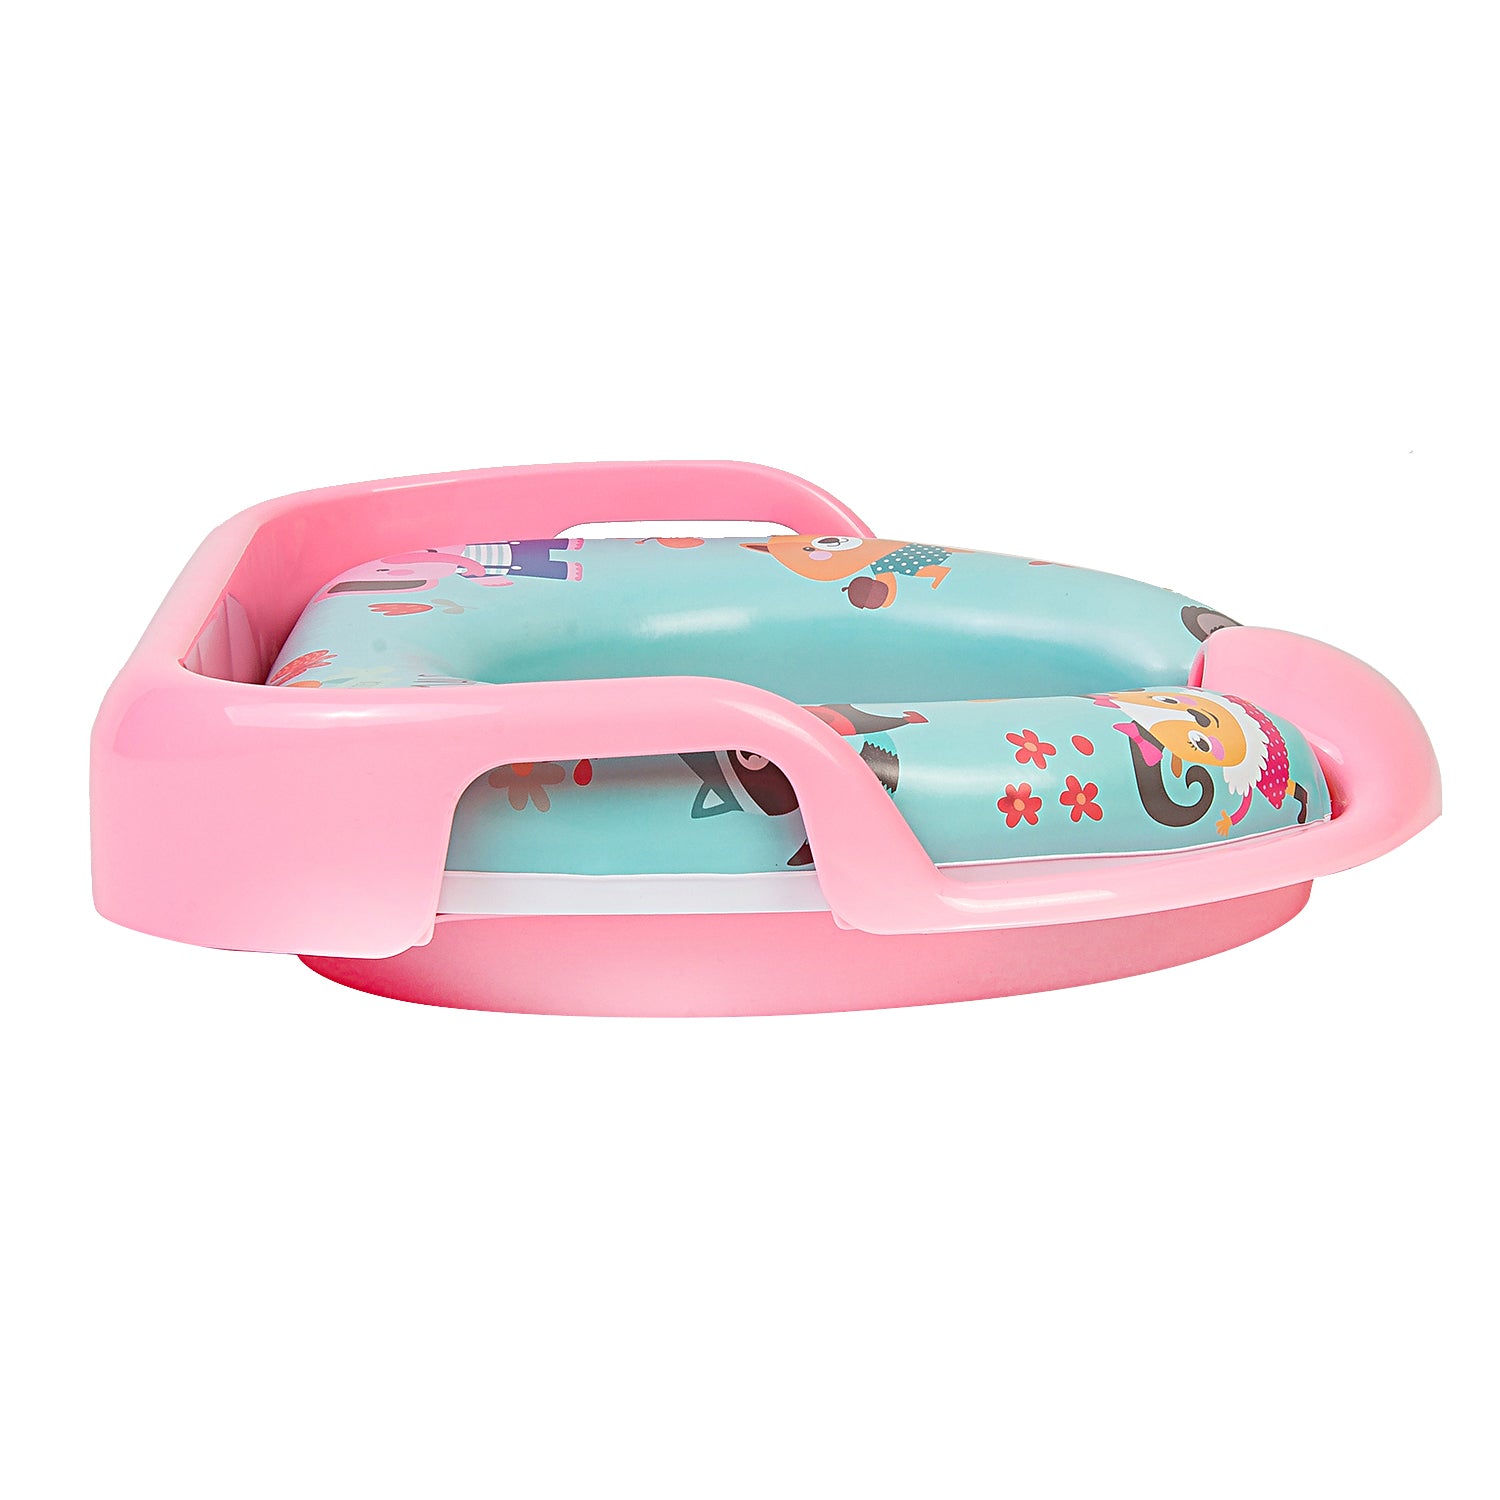 Animals Blue And Pink Potty Seat With Handle And Back Support - Baby Moo